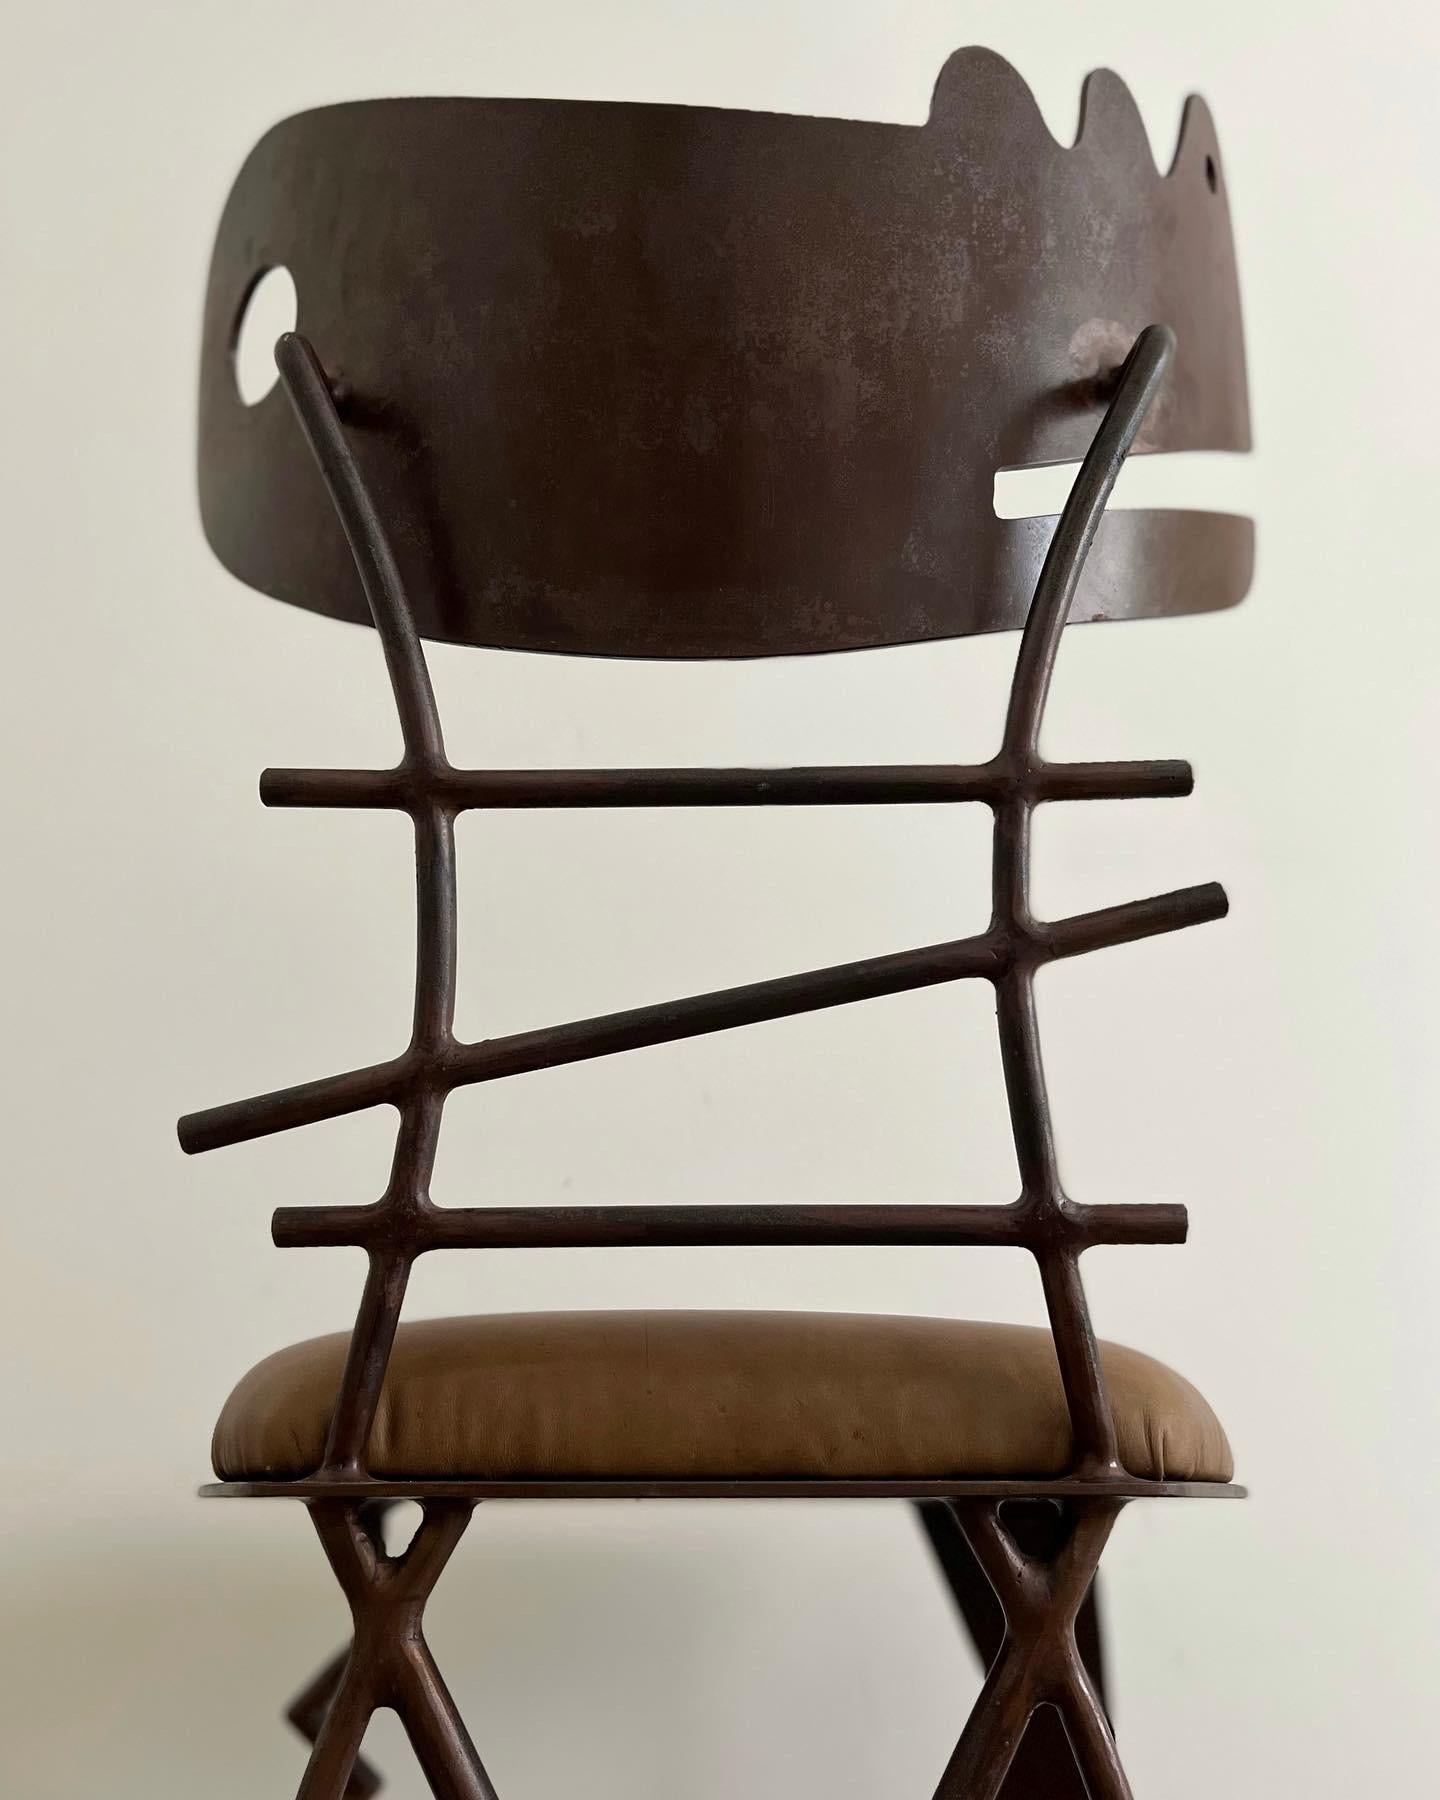 Offered is a Gregory Hawthorne iron chair crafted from welded metal. The seat was reupholstered in distressed brown, olive colored leather that is soft to the touch. The chair would function well as an accent chair or sculptural art piece in a